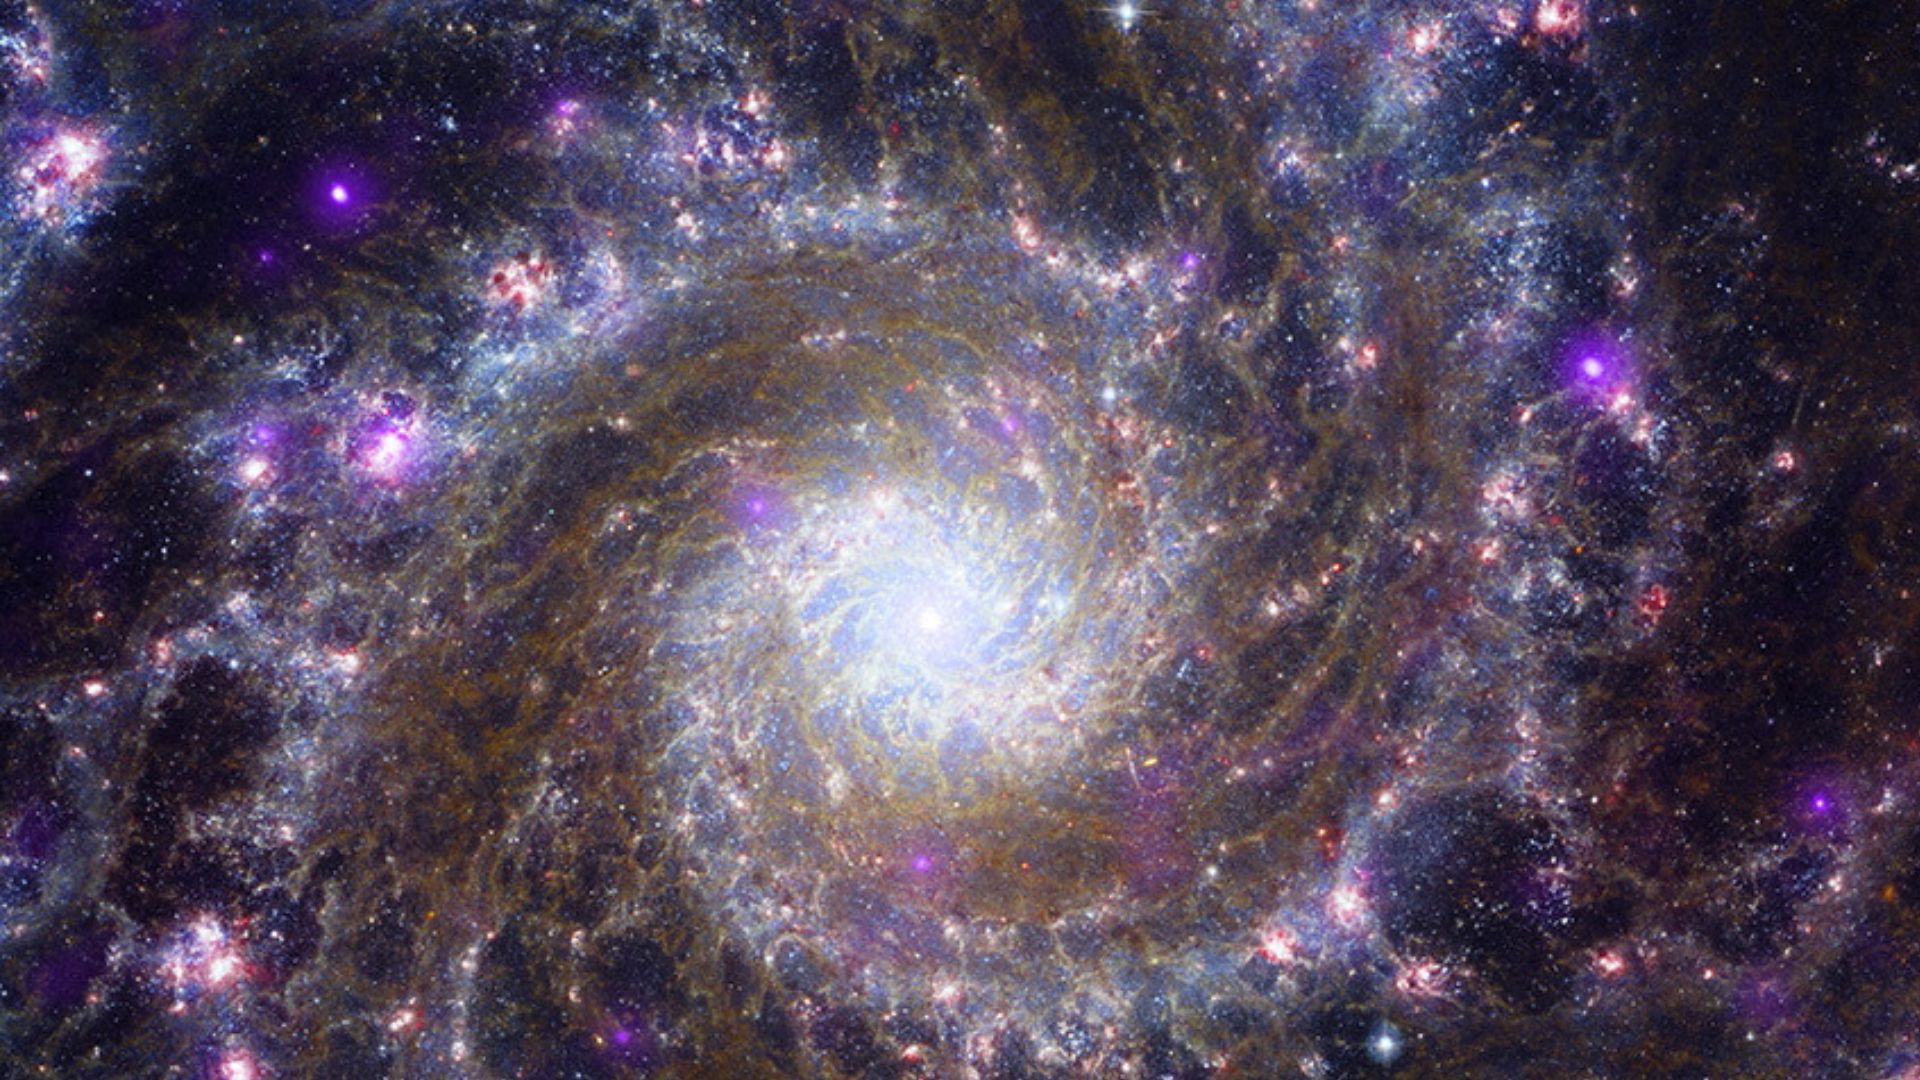 An image of a spiral galaxy like our own Milky Way, known as Messier 74, is seen in a composite image taken by the James Webb Telescope this year. /NASA/ESA/Handout via Reuters
